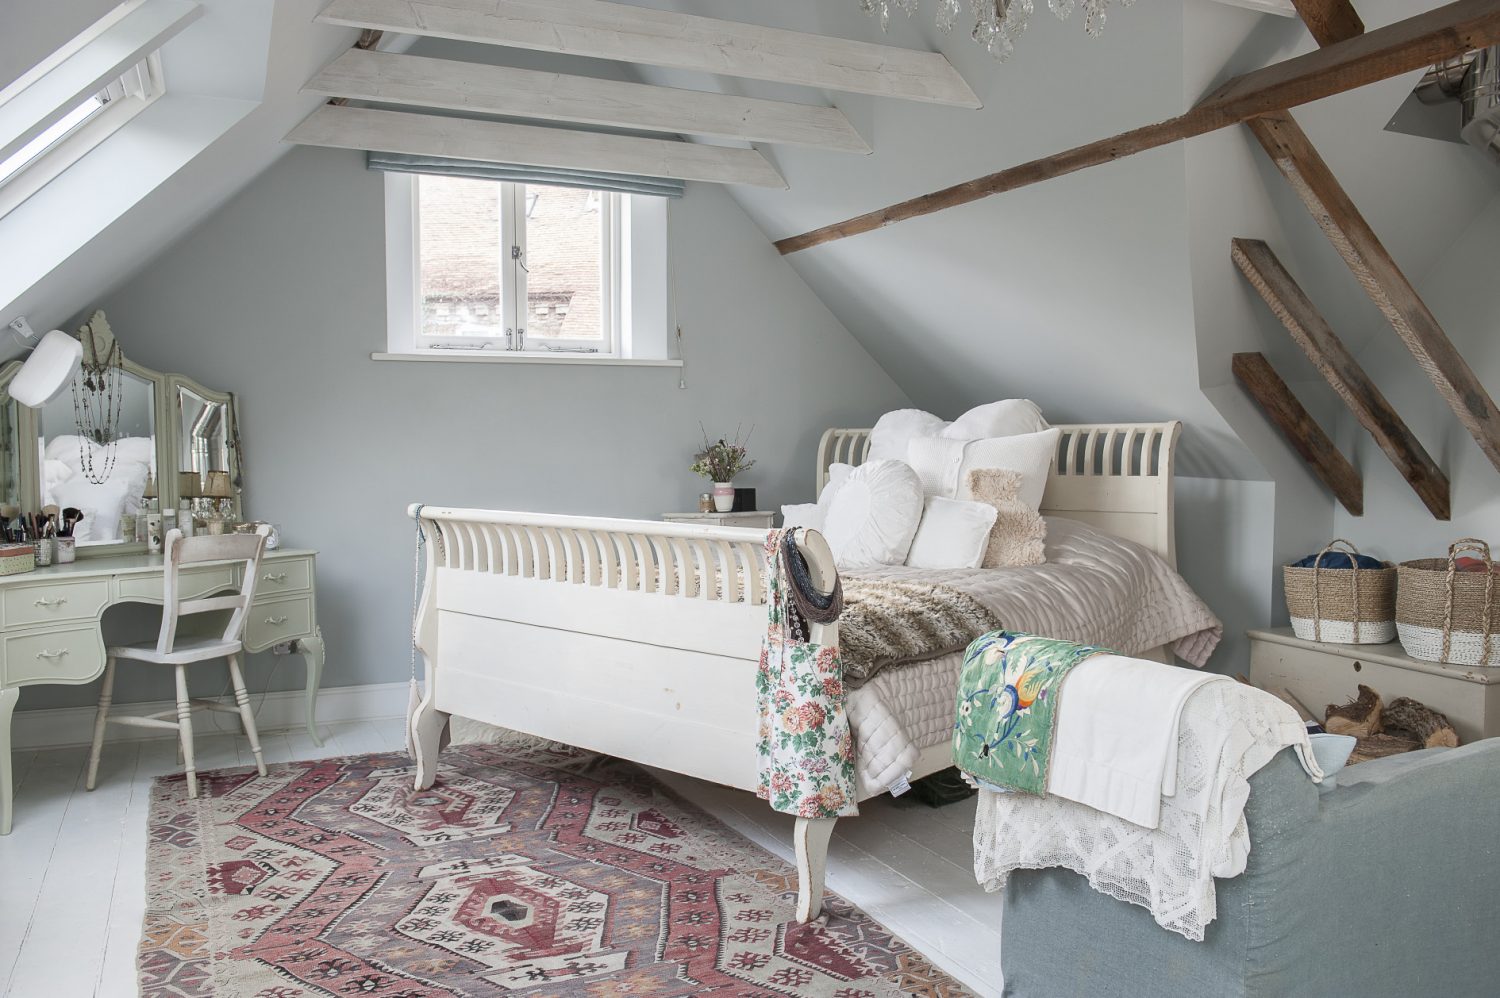 Emma’s own bedroom one might expect to be something special and, of course, it is. It started life as the hayloft above what is now the drawing room